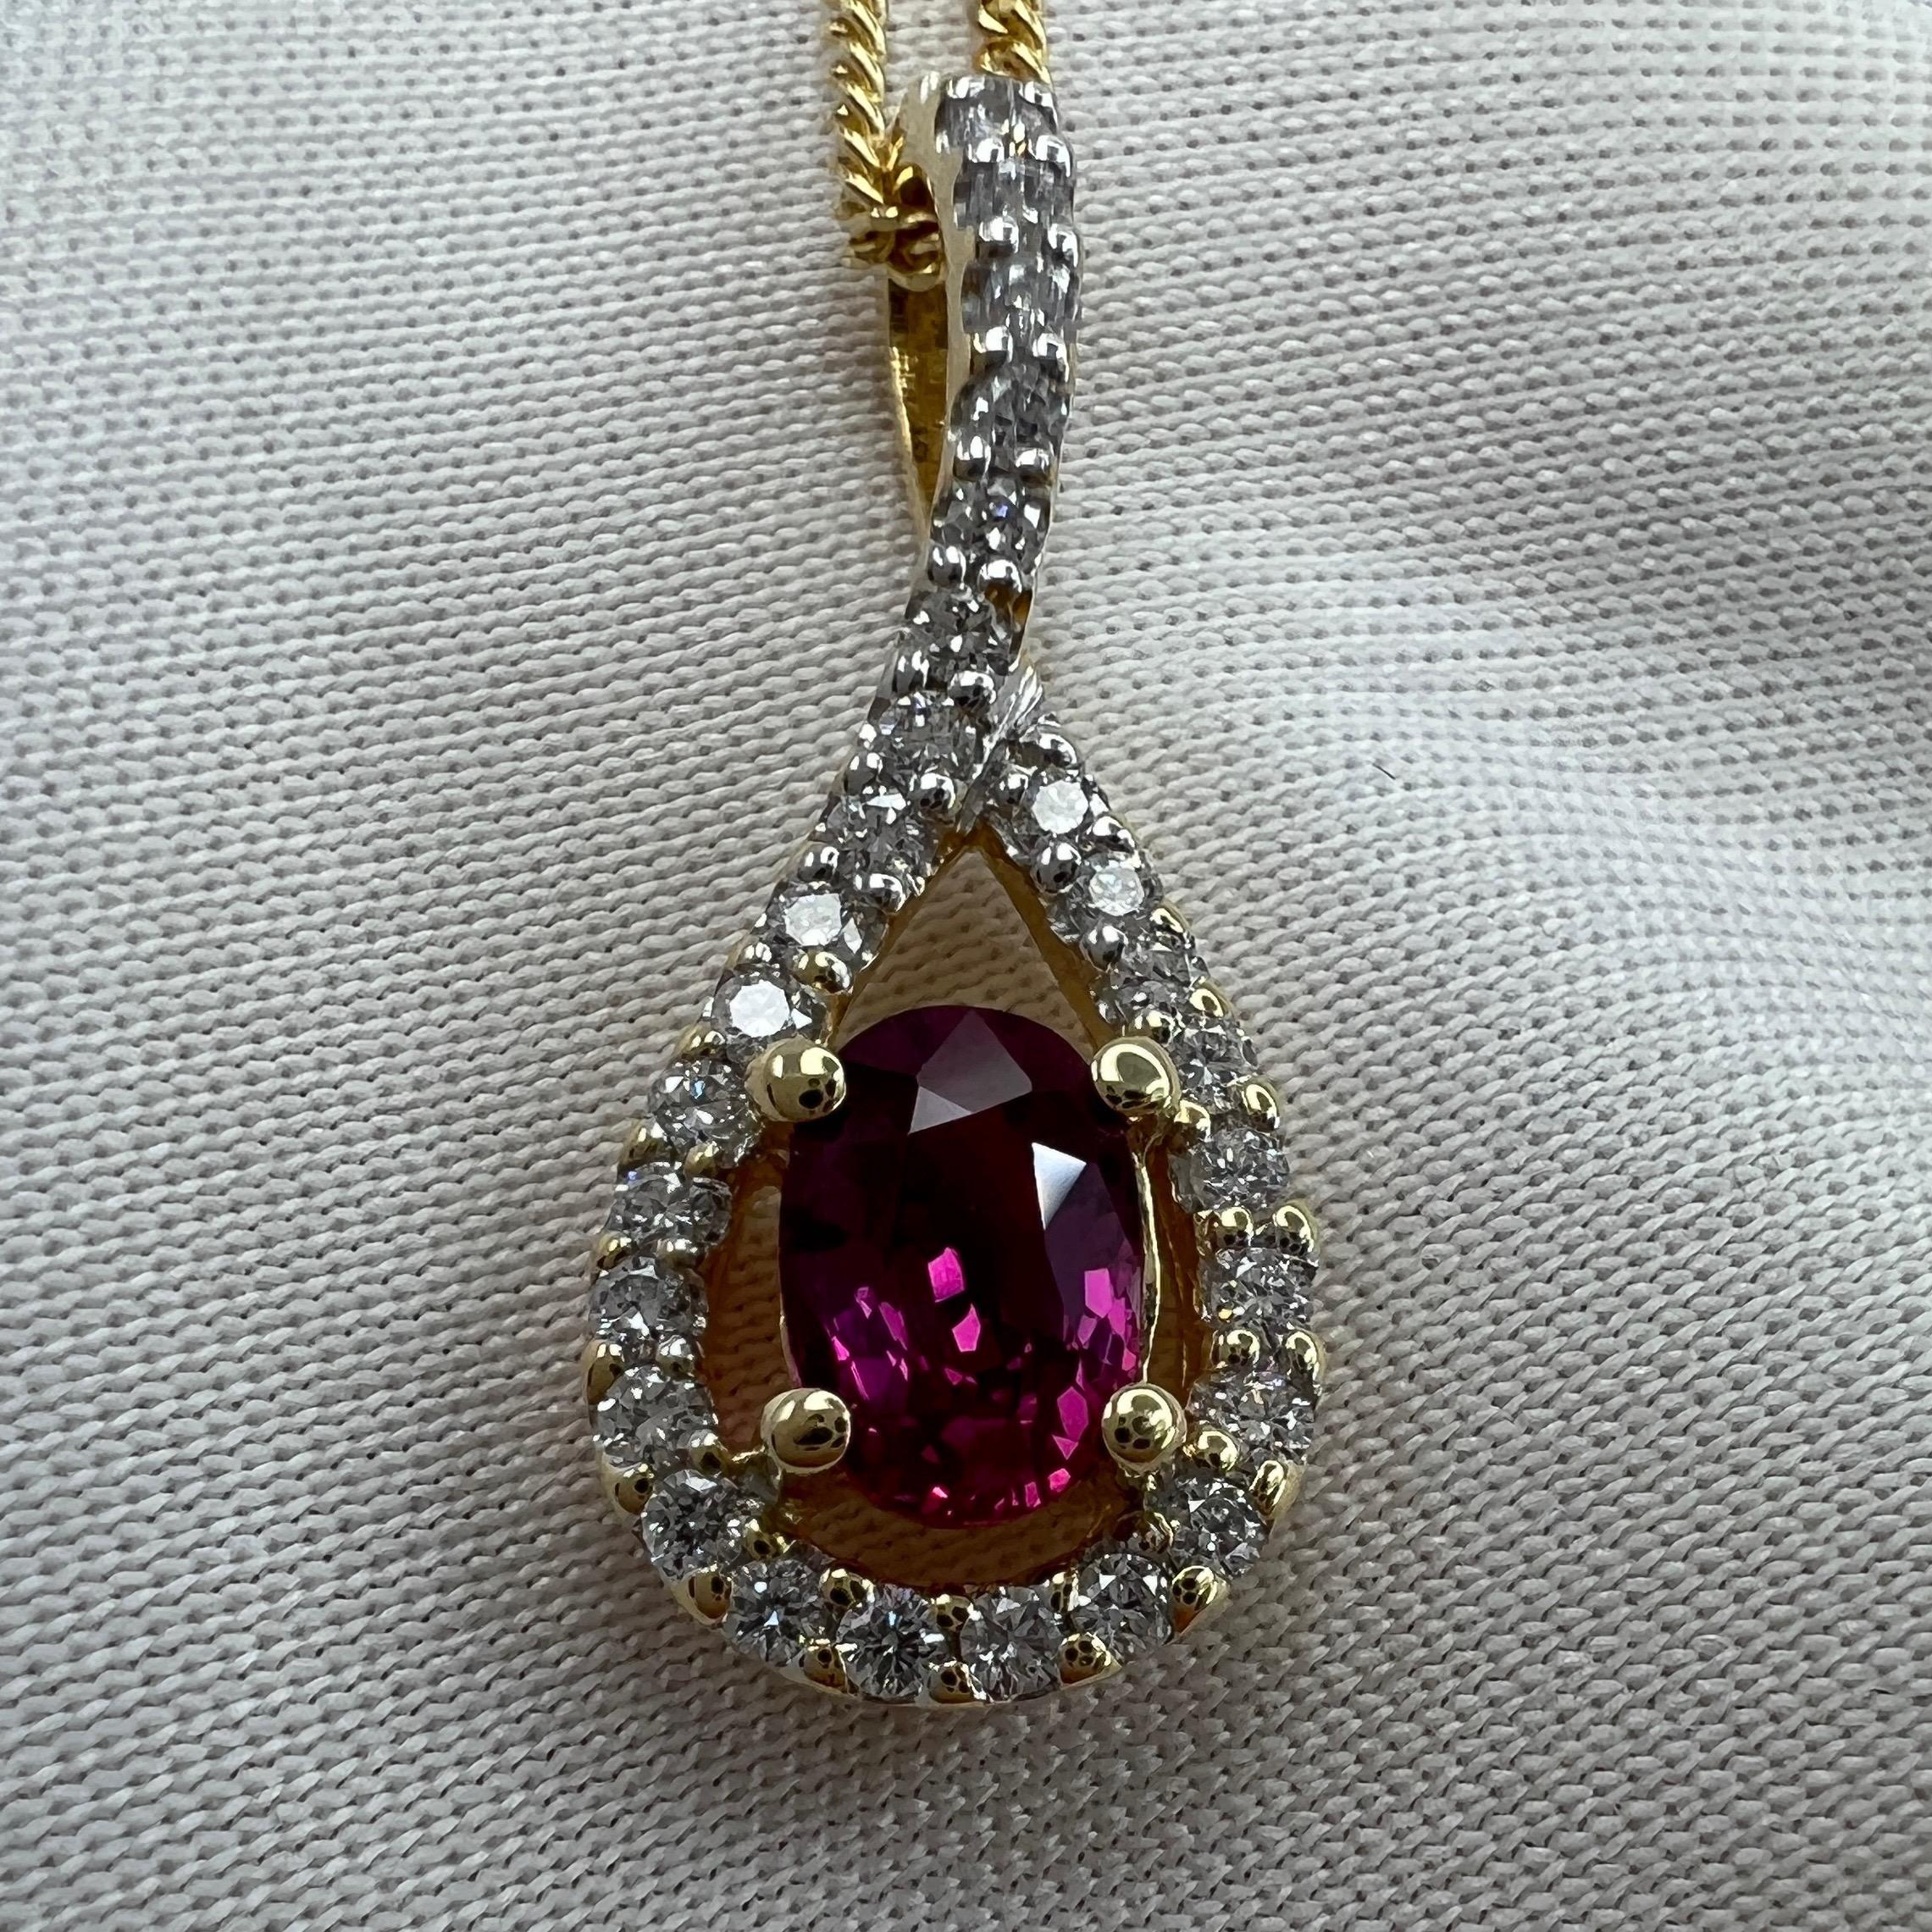 Vivid Pink Untreated Sapphire & Diamond 18k Yellow & White Gold Crossover Pendant.

Fine 0.61 Carat IGI certified untreated sapphire with a unique vivid reddish purple-pink colour and excellent clarity, very clean stone. 
Also has an excellent oval